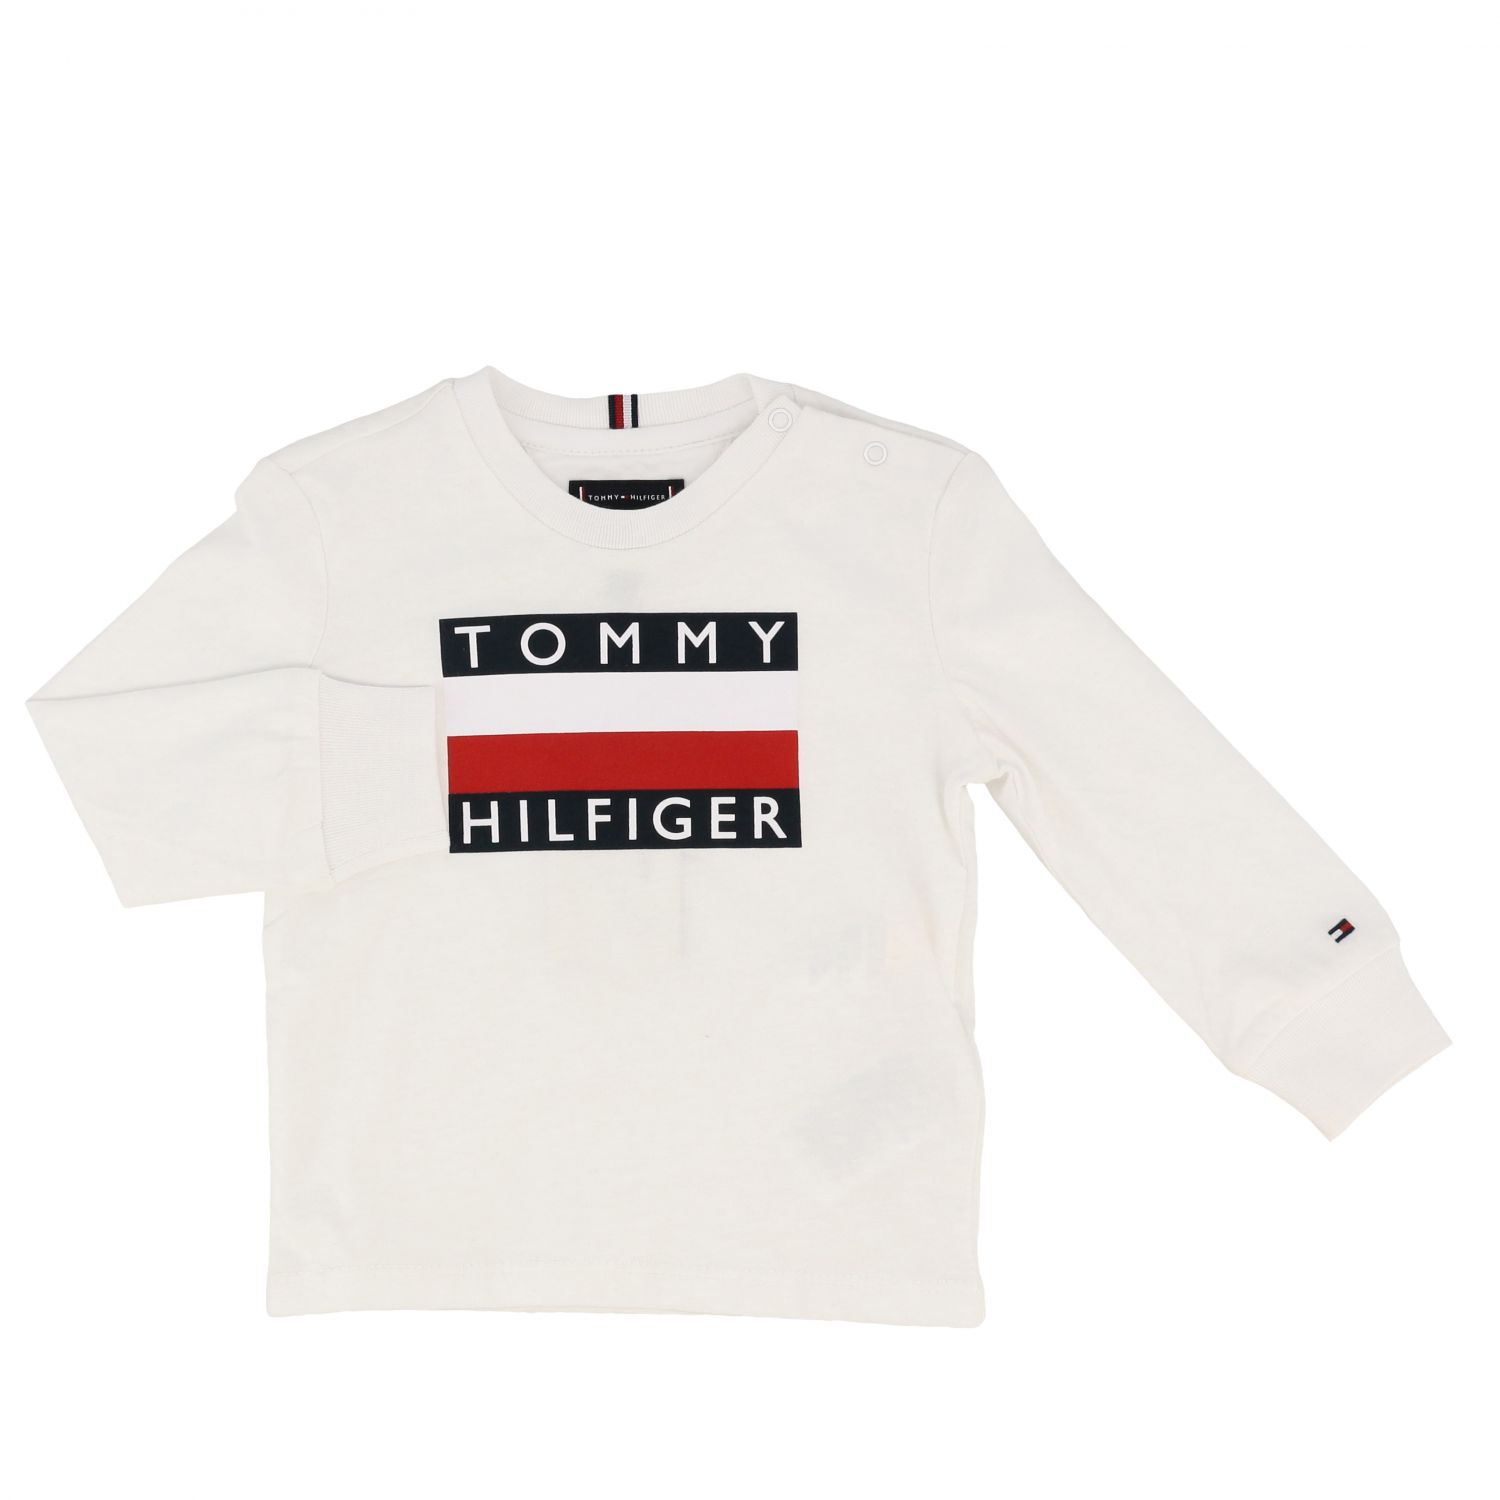 tommy hilfiger sweater with logo